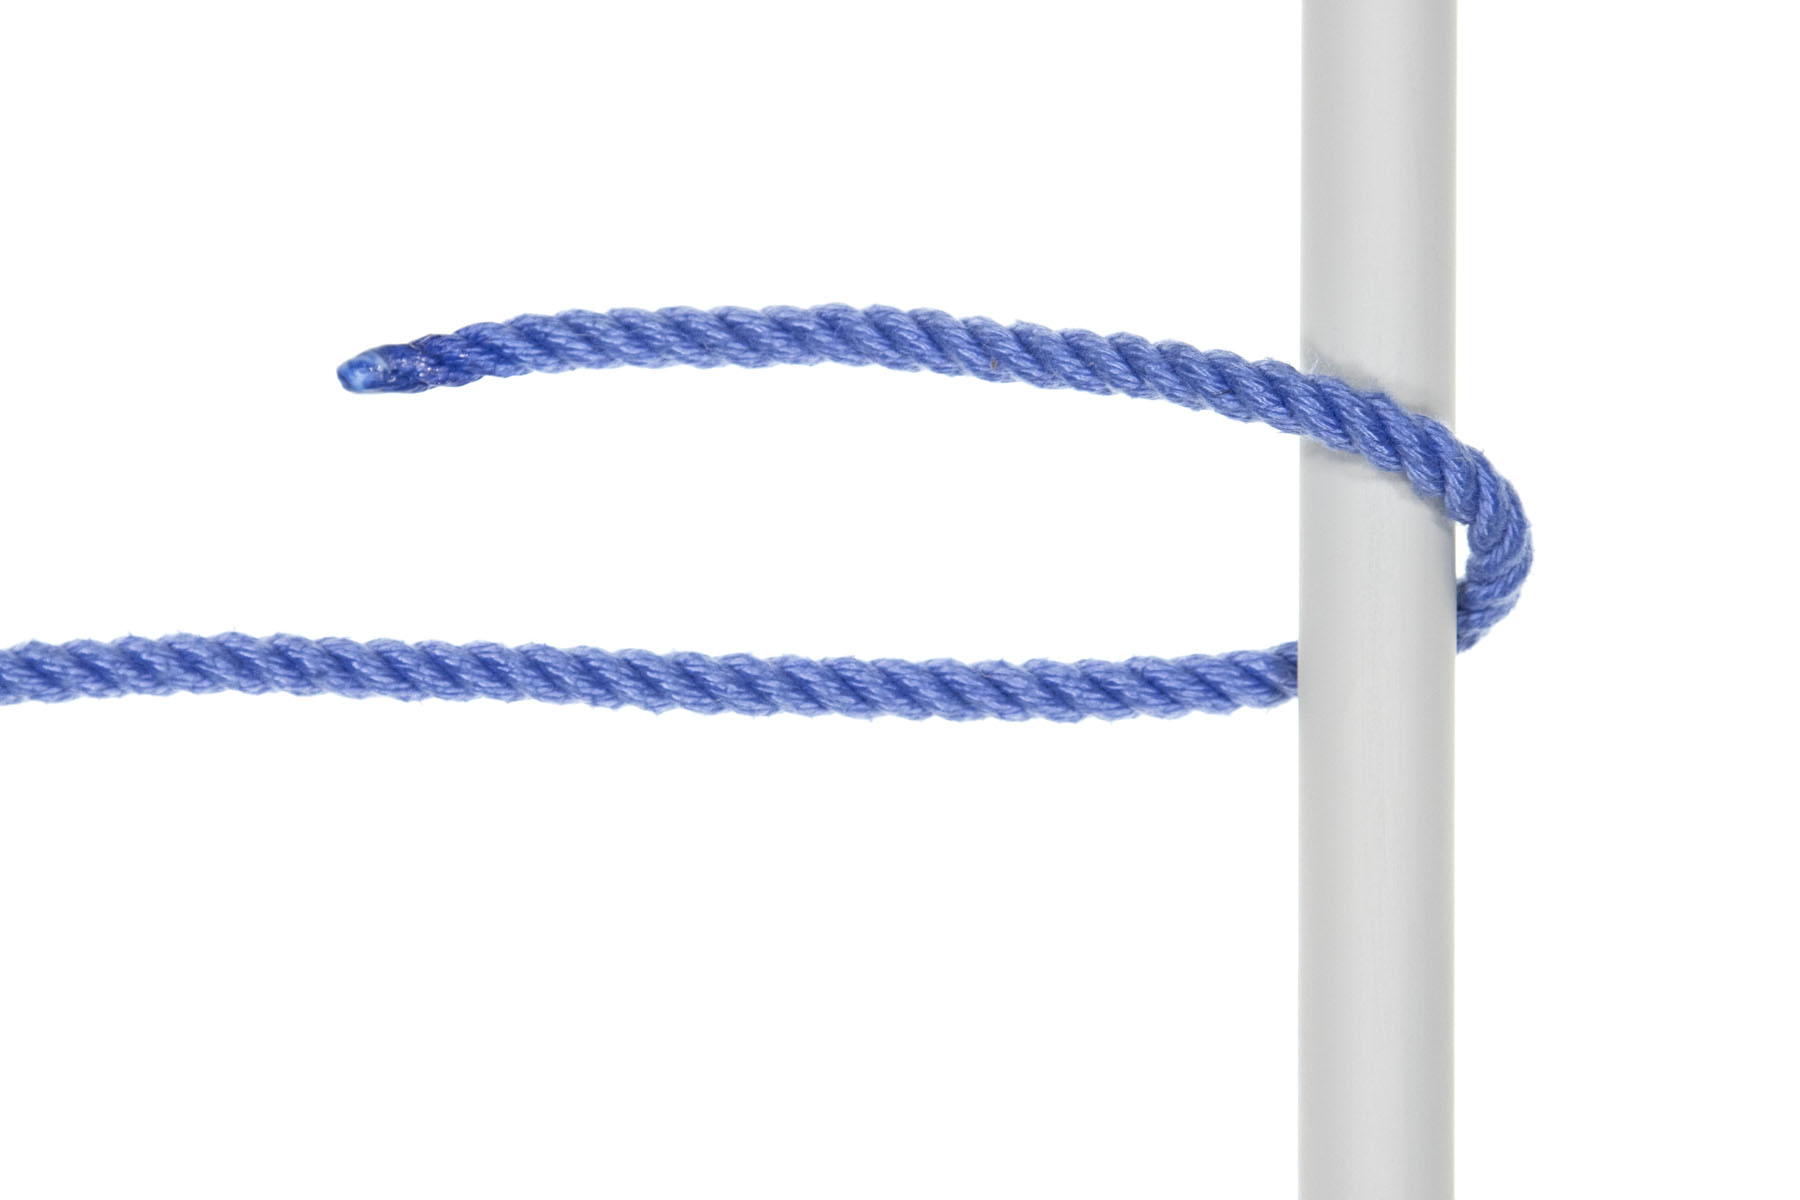 A one inch gray pole crosses the frame from top to bottom. A single strand of blue rope enters from the left, goes under the pole, and doubles back around it.